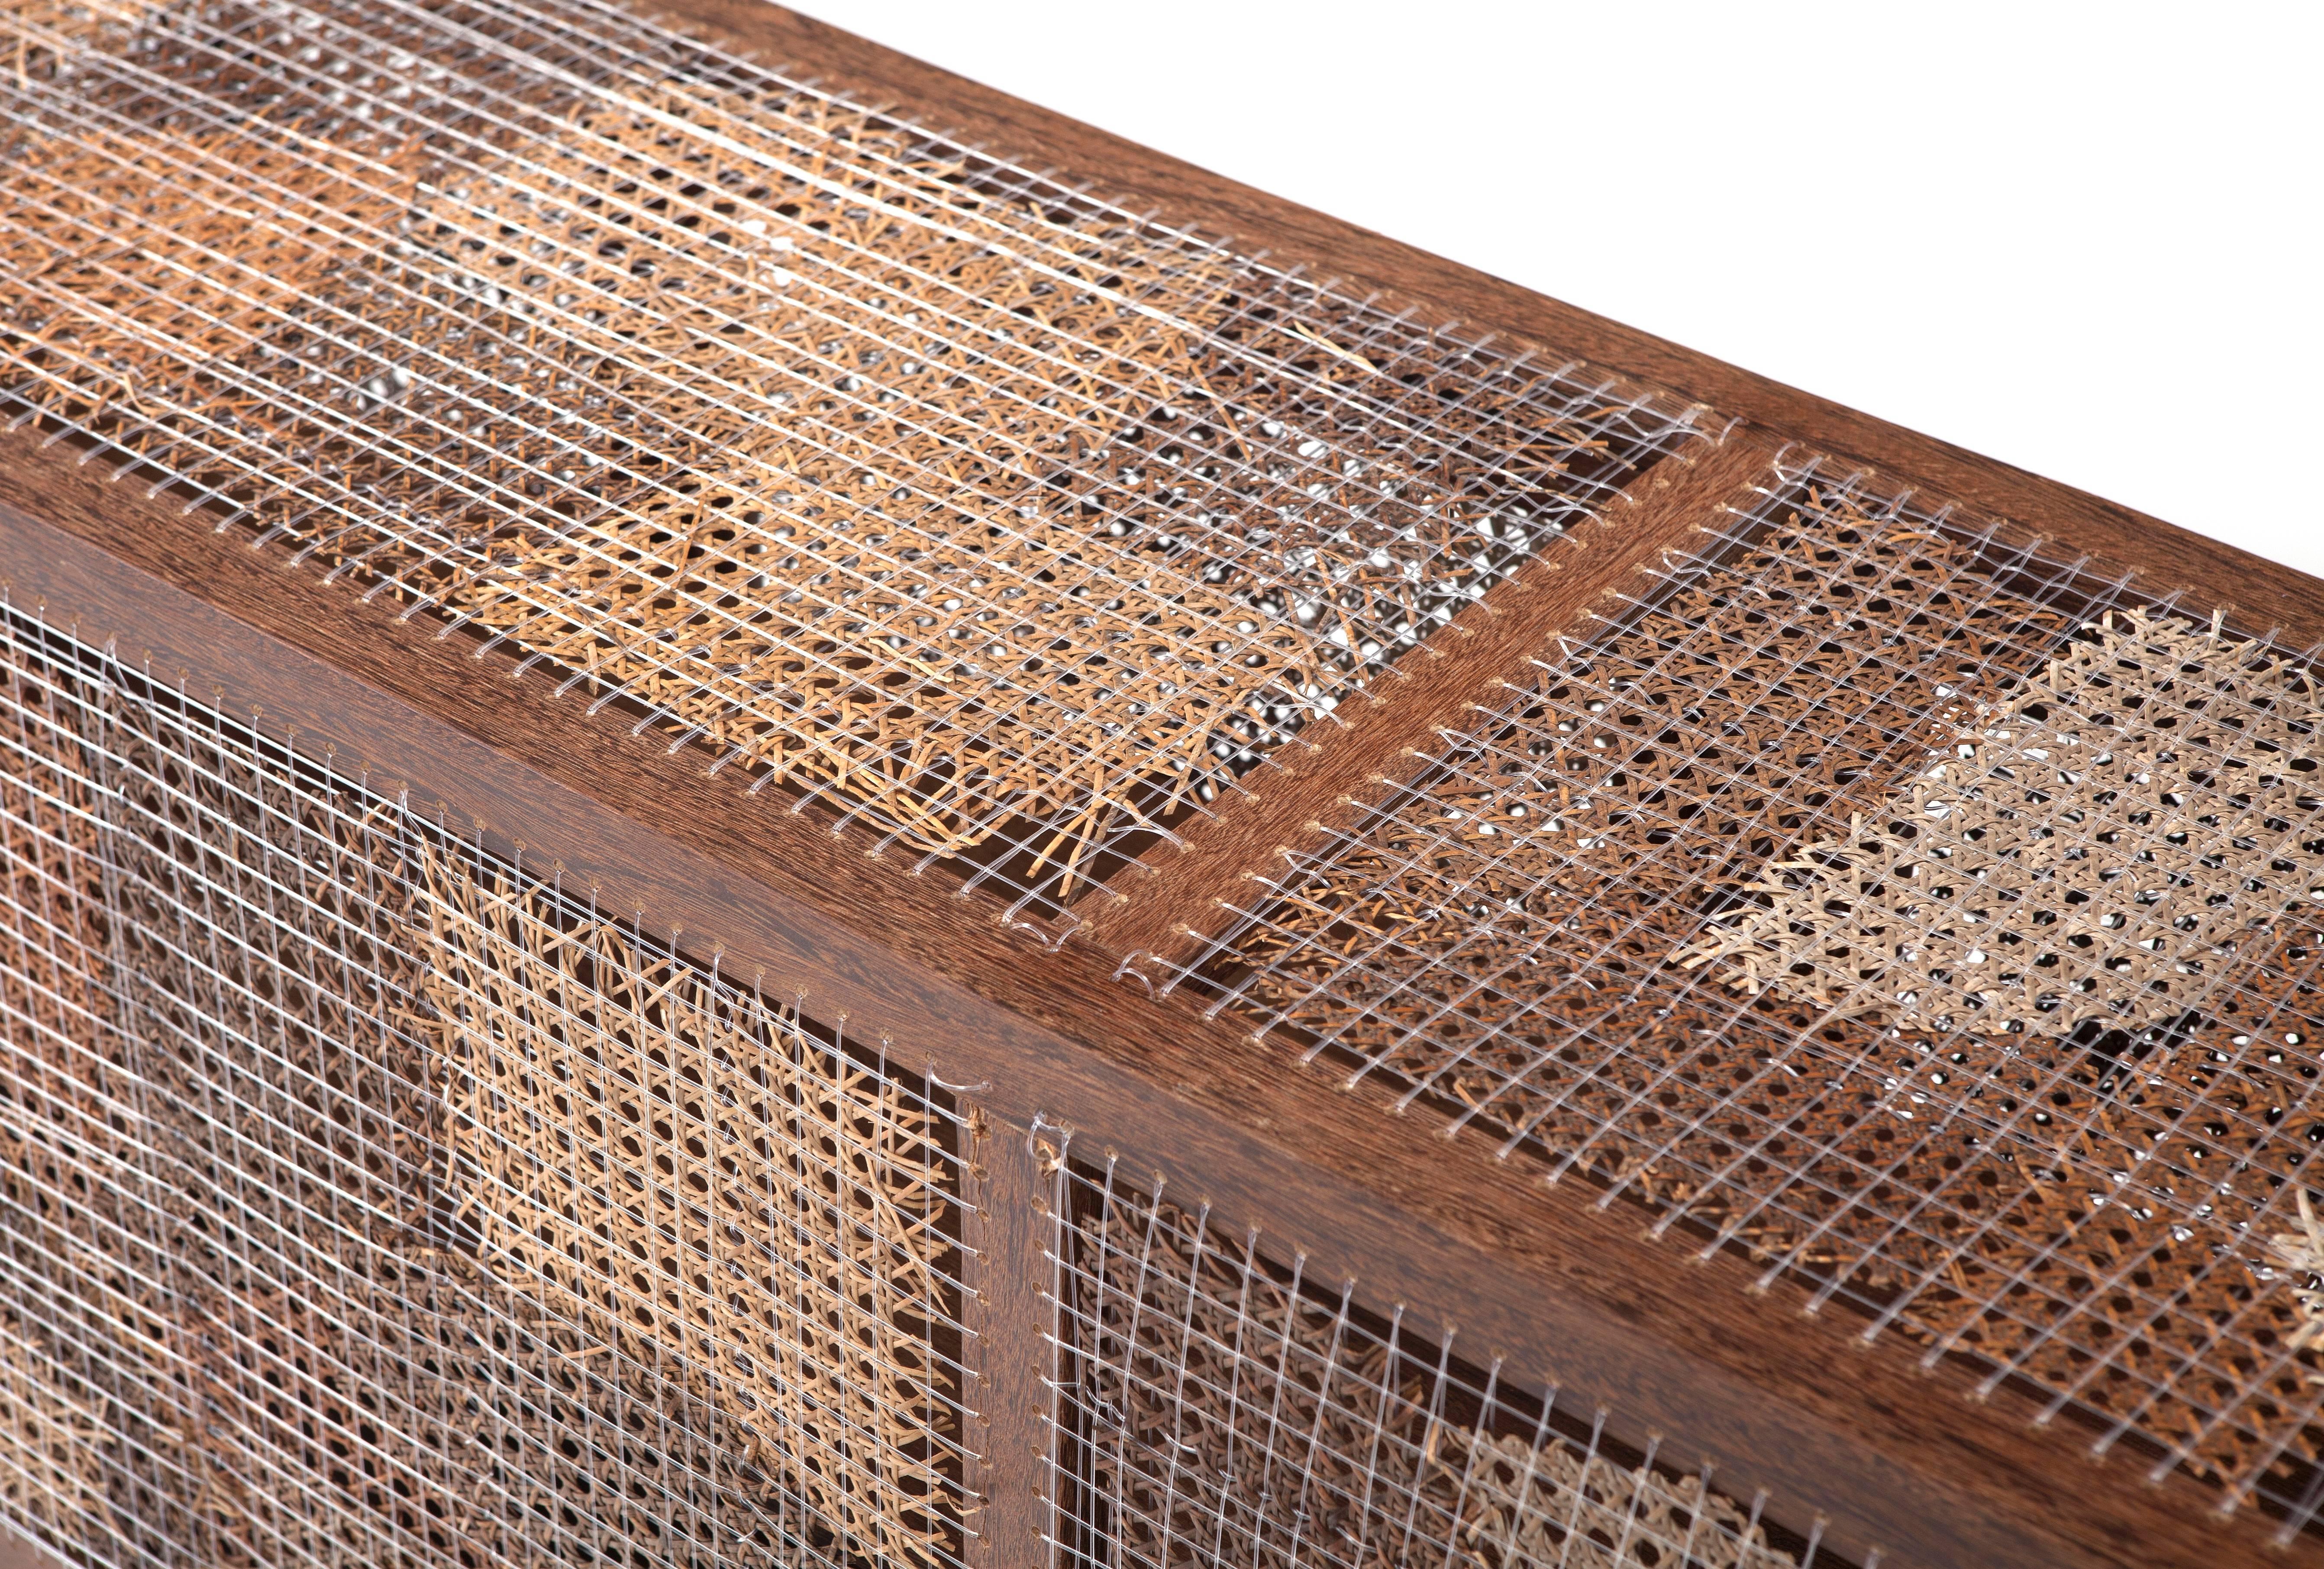 Brazilian design duo and brother Fernando and Humberto Campana created this Thonet wicker, woven nylon and sucupira wood buffet from reclaimed/recycled materials.

The Campana Brothers, Fernando (b. 1961) and Humberto (b. 1953) were born in